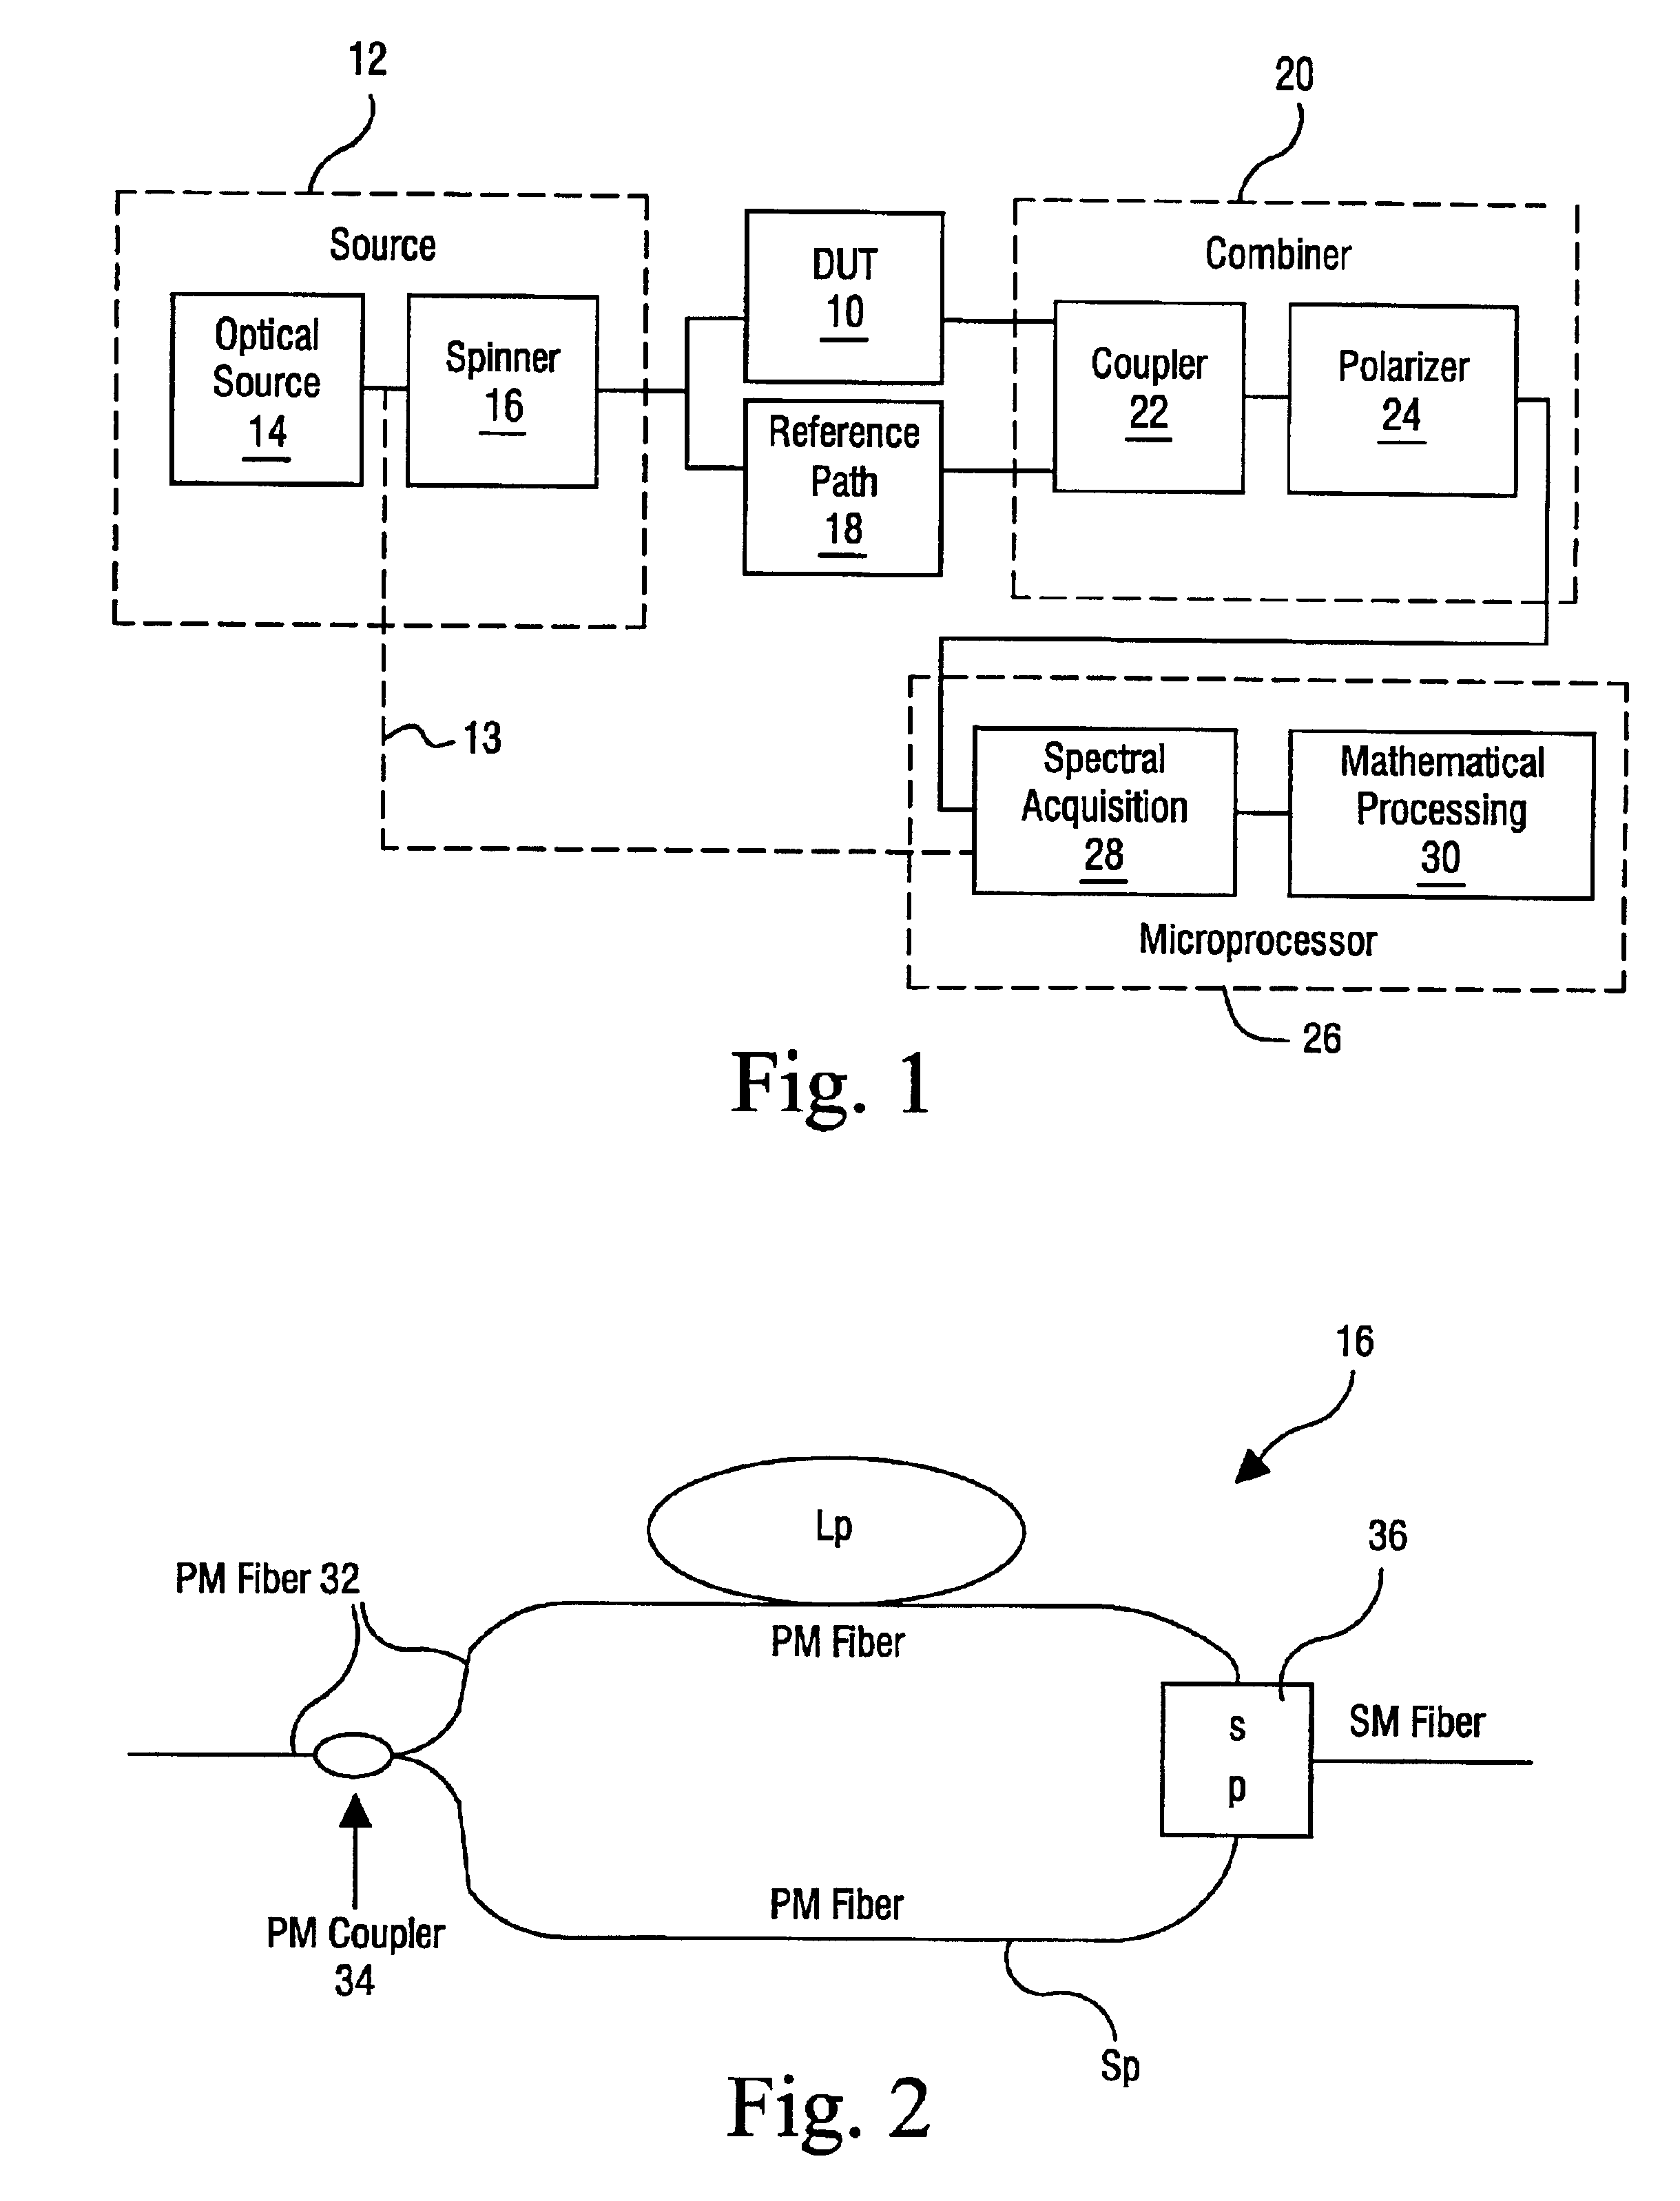 Apparatus and method for the complete characterization of optical devices including loss, birefringence and dispersion effects